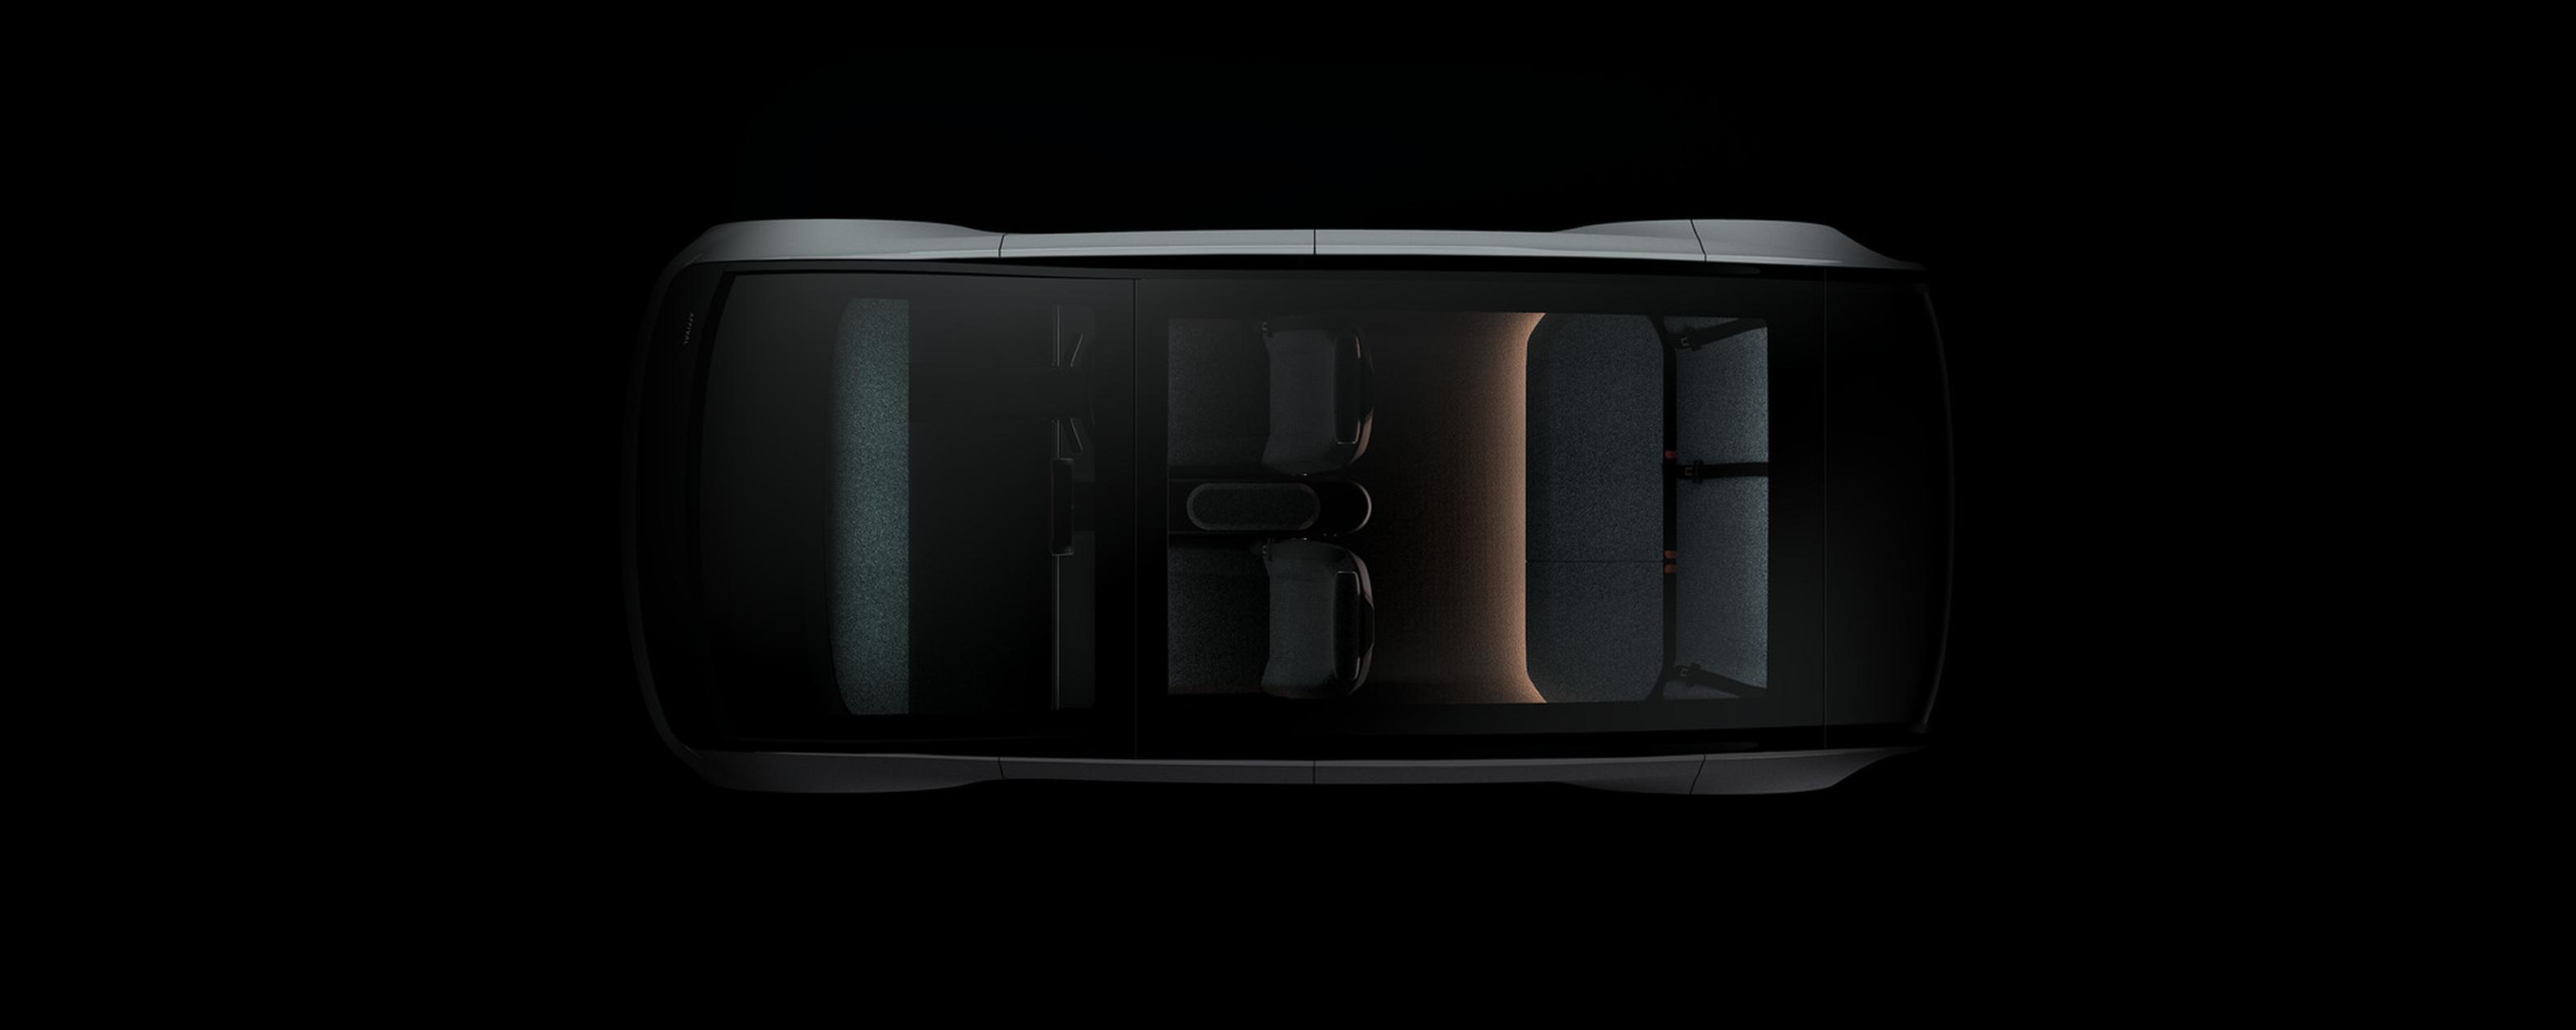 The Arrival Car will feature a panoramic roof, offer ample space for passengers and their luggage while also being more comfortable for drivers (Arrival)